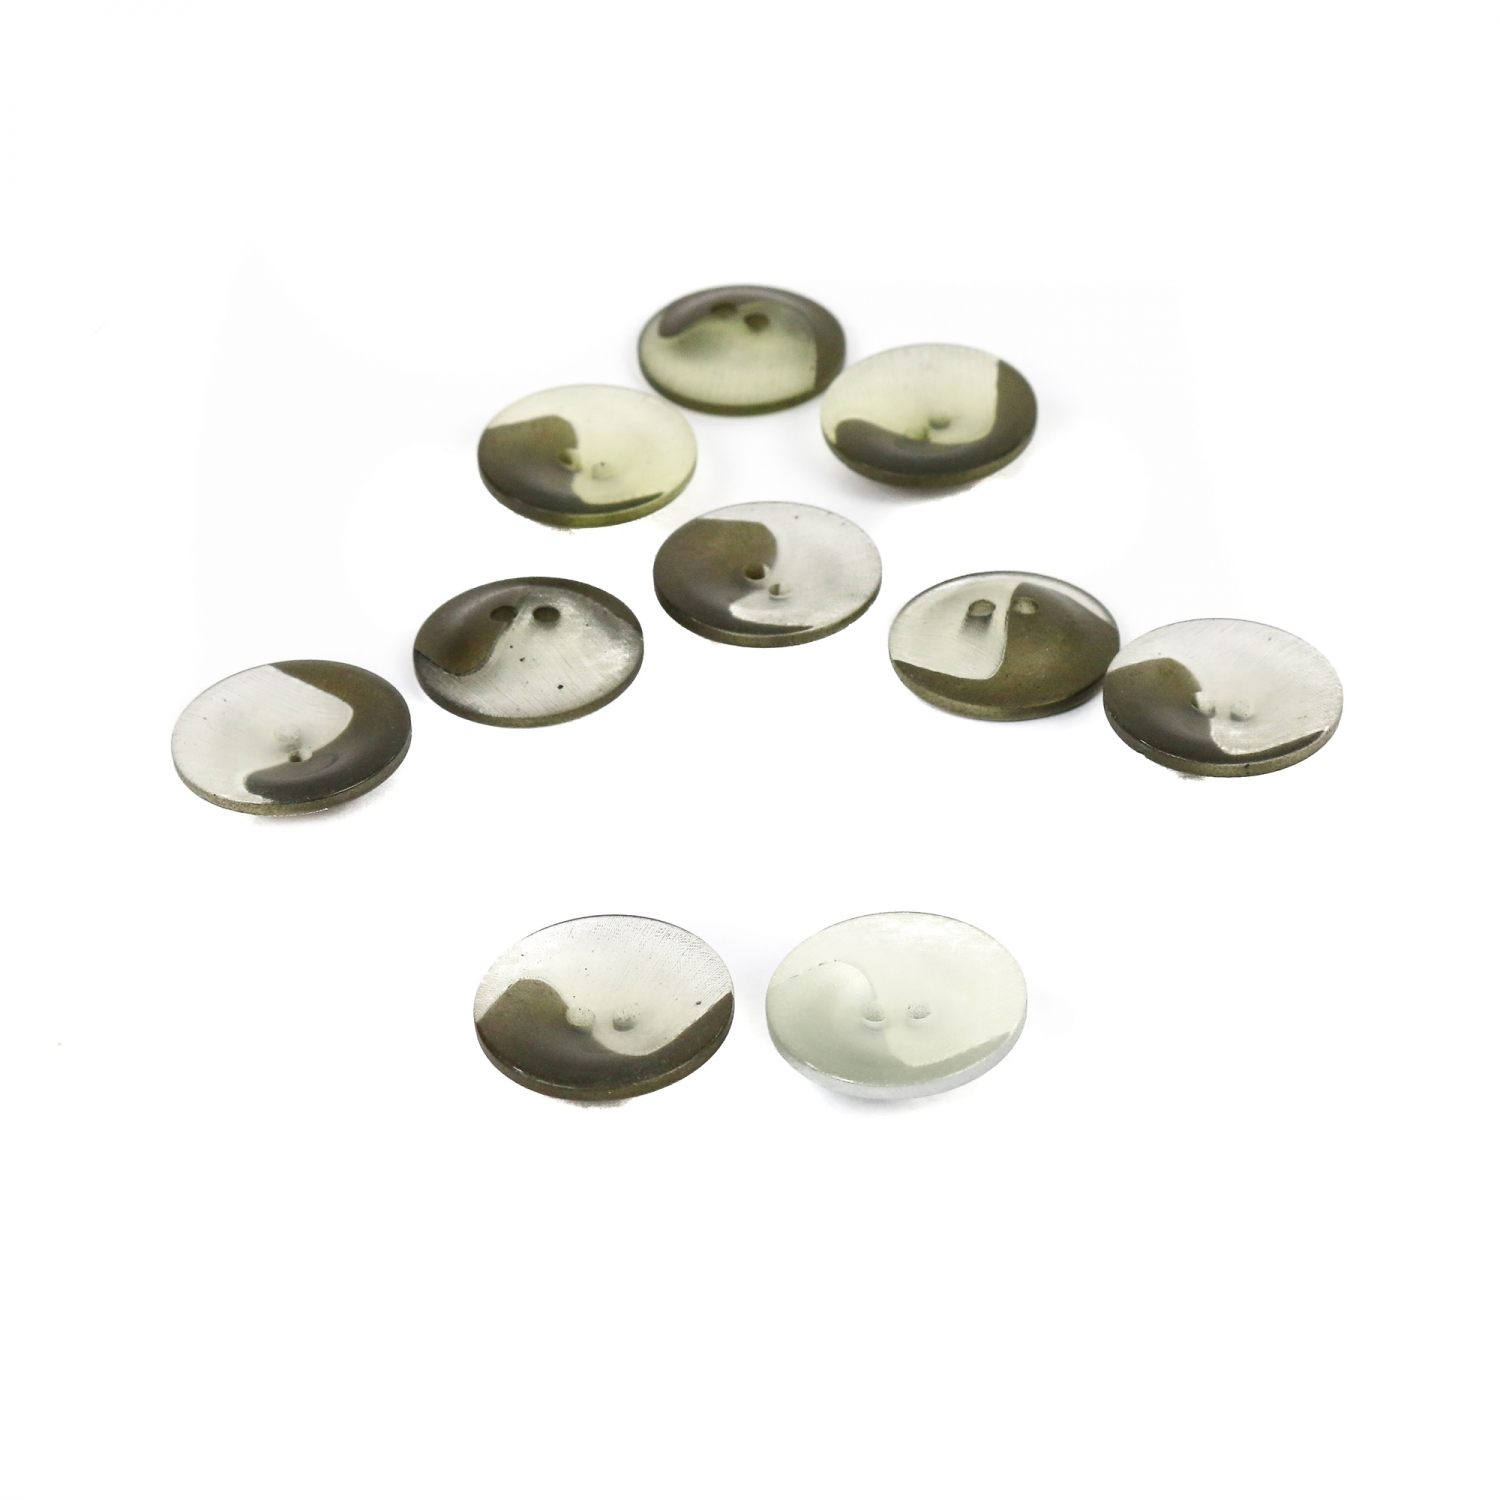 2 Holes Buttons, 23 mm  (50 pcs/pack)Code: 13462/36